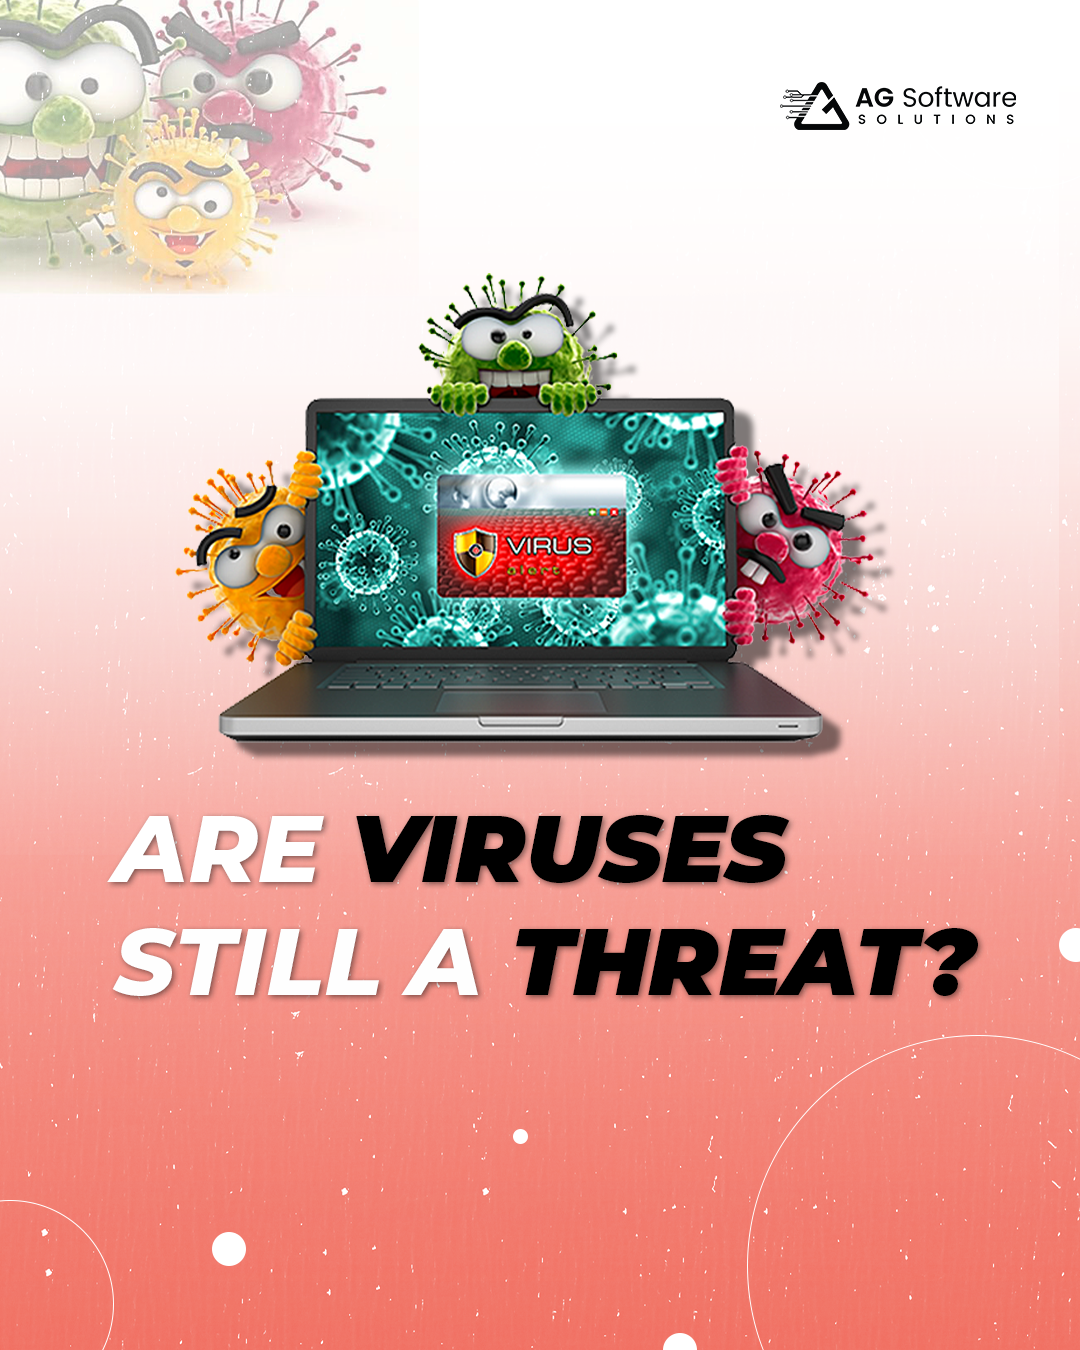 Do You Still Need to Worry About Computer Viruses?